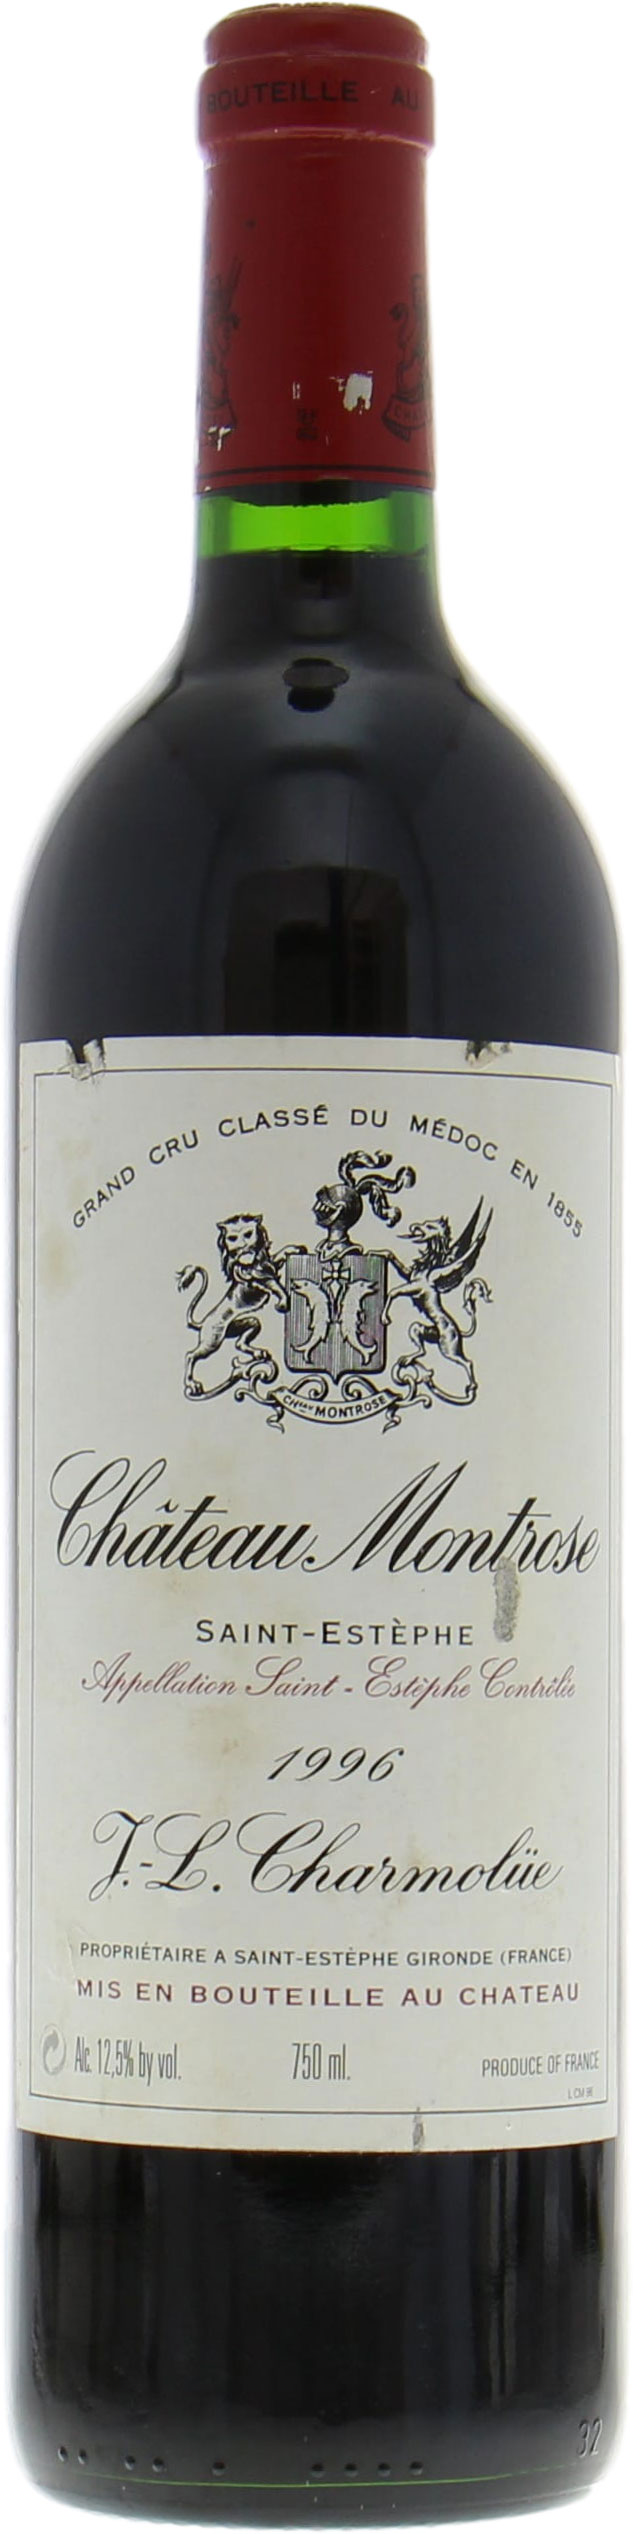 Chateau Montrose - Chateau Montrose 1999 From Original Wooden Case